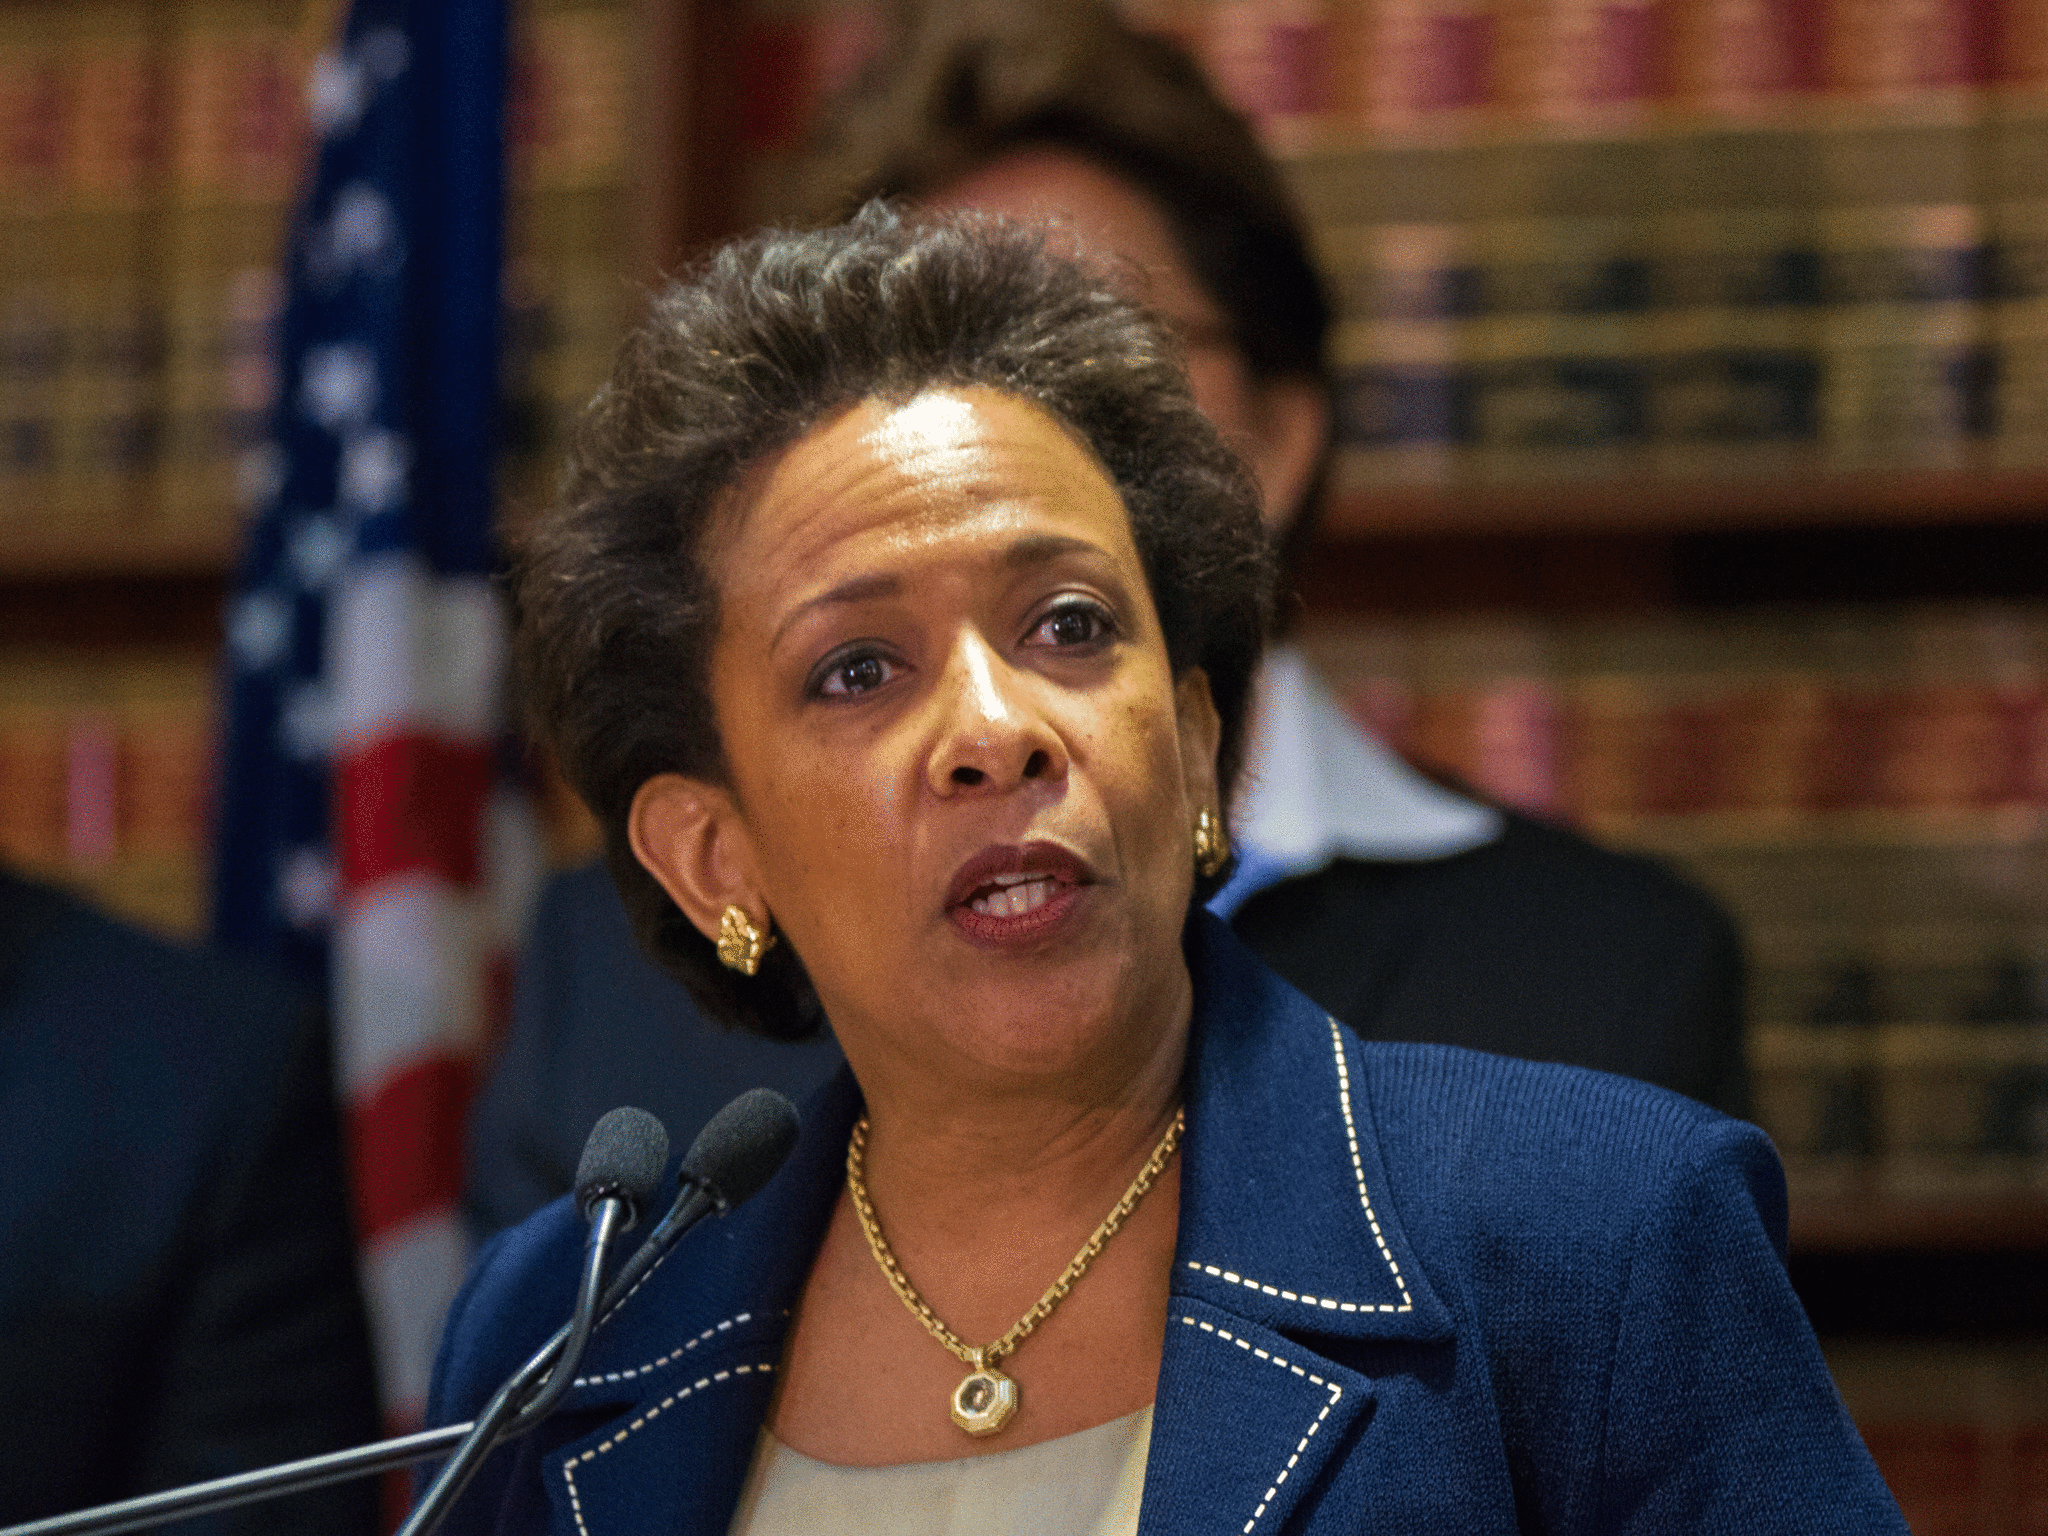 Loretta Lynch is the first black woman to be appointed US Attorney General